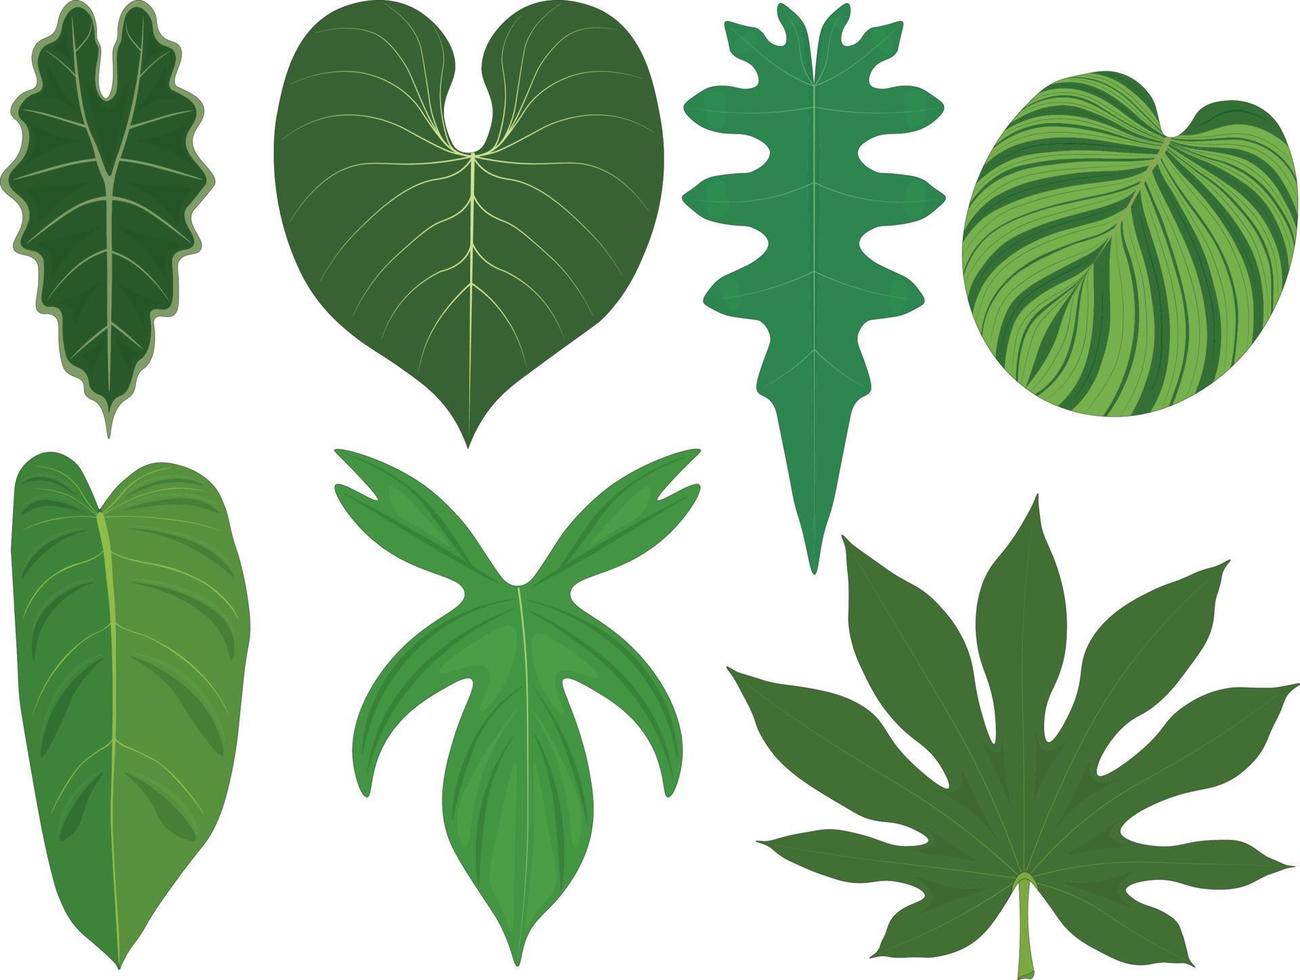 Tropical forest plants giant leaves collection vector illustration